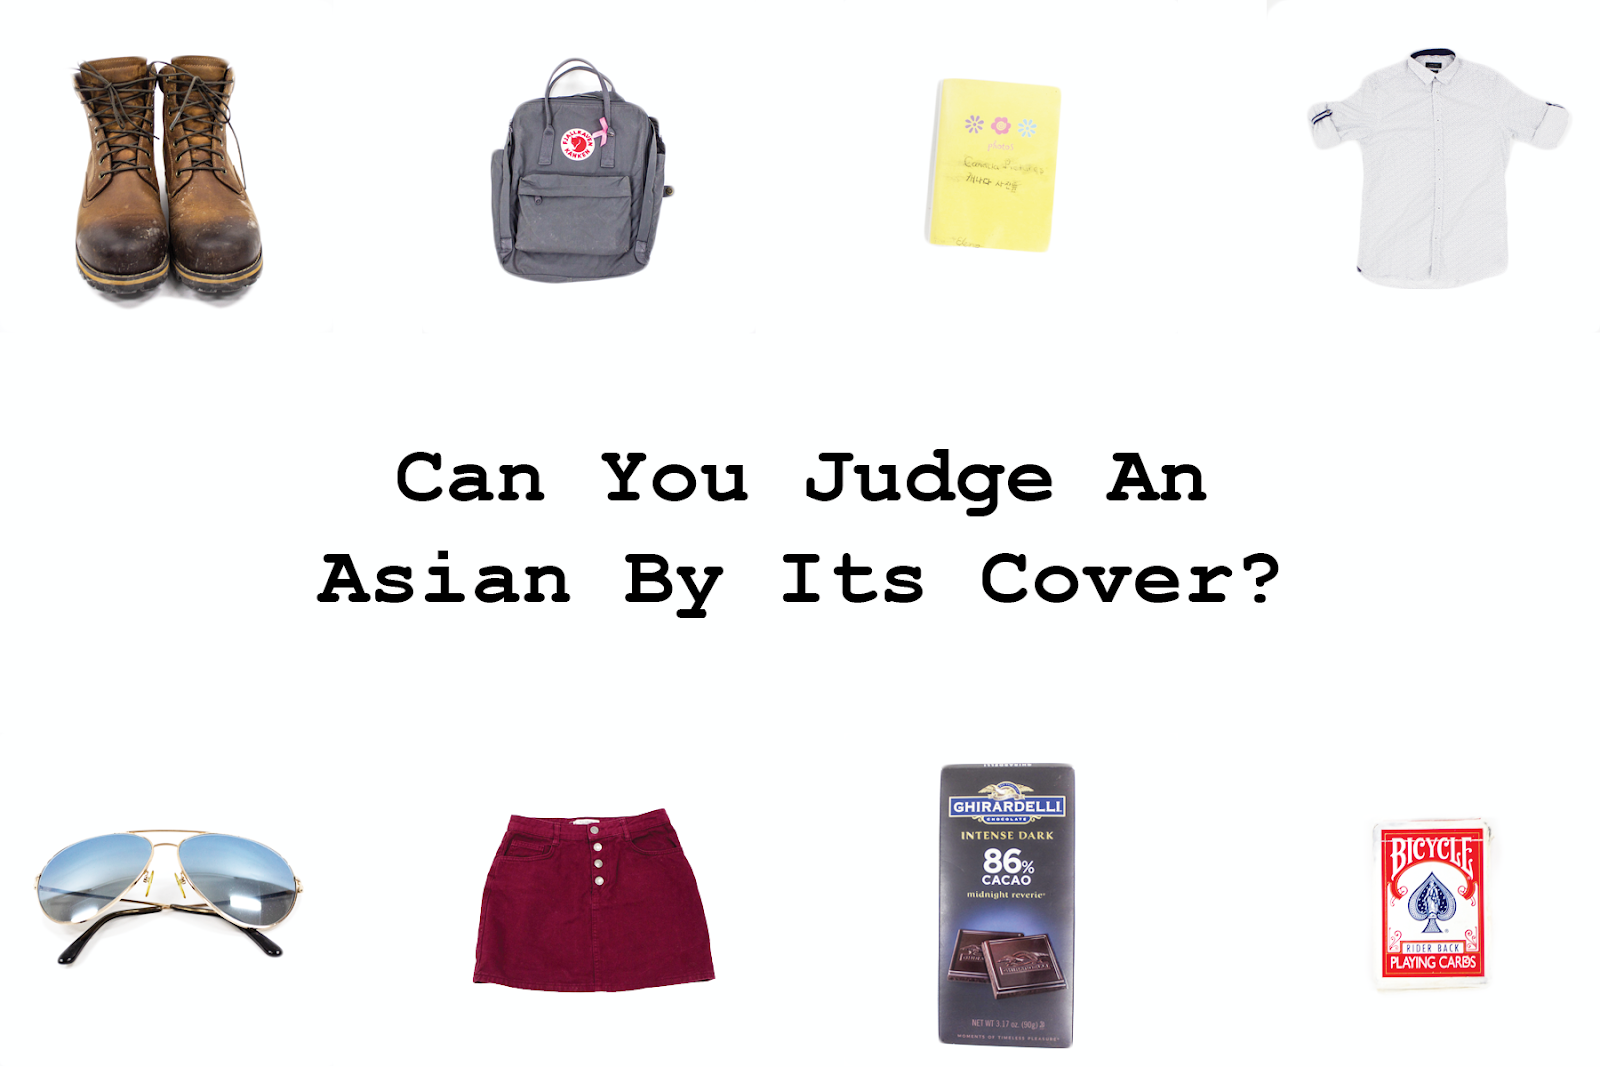 Can You Judge an Asian by its Cover poster with cutout photos of brown boots, grey backpack, yellow notebook, and white shirt in top row and sunglasses, red skirt, chocolate bar, and deck of cards in bottom row